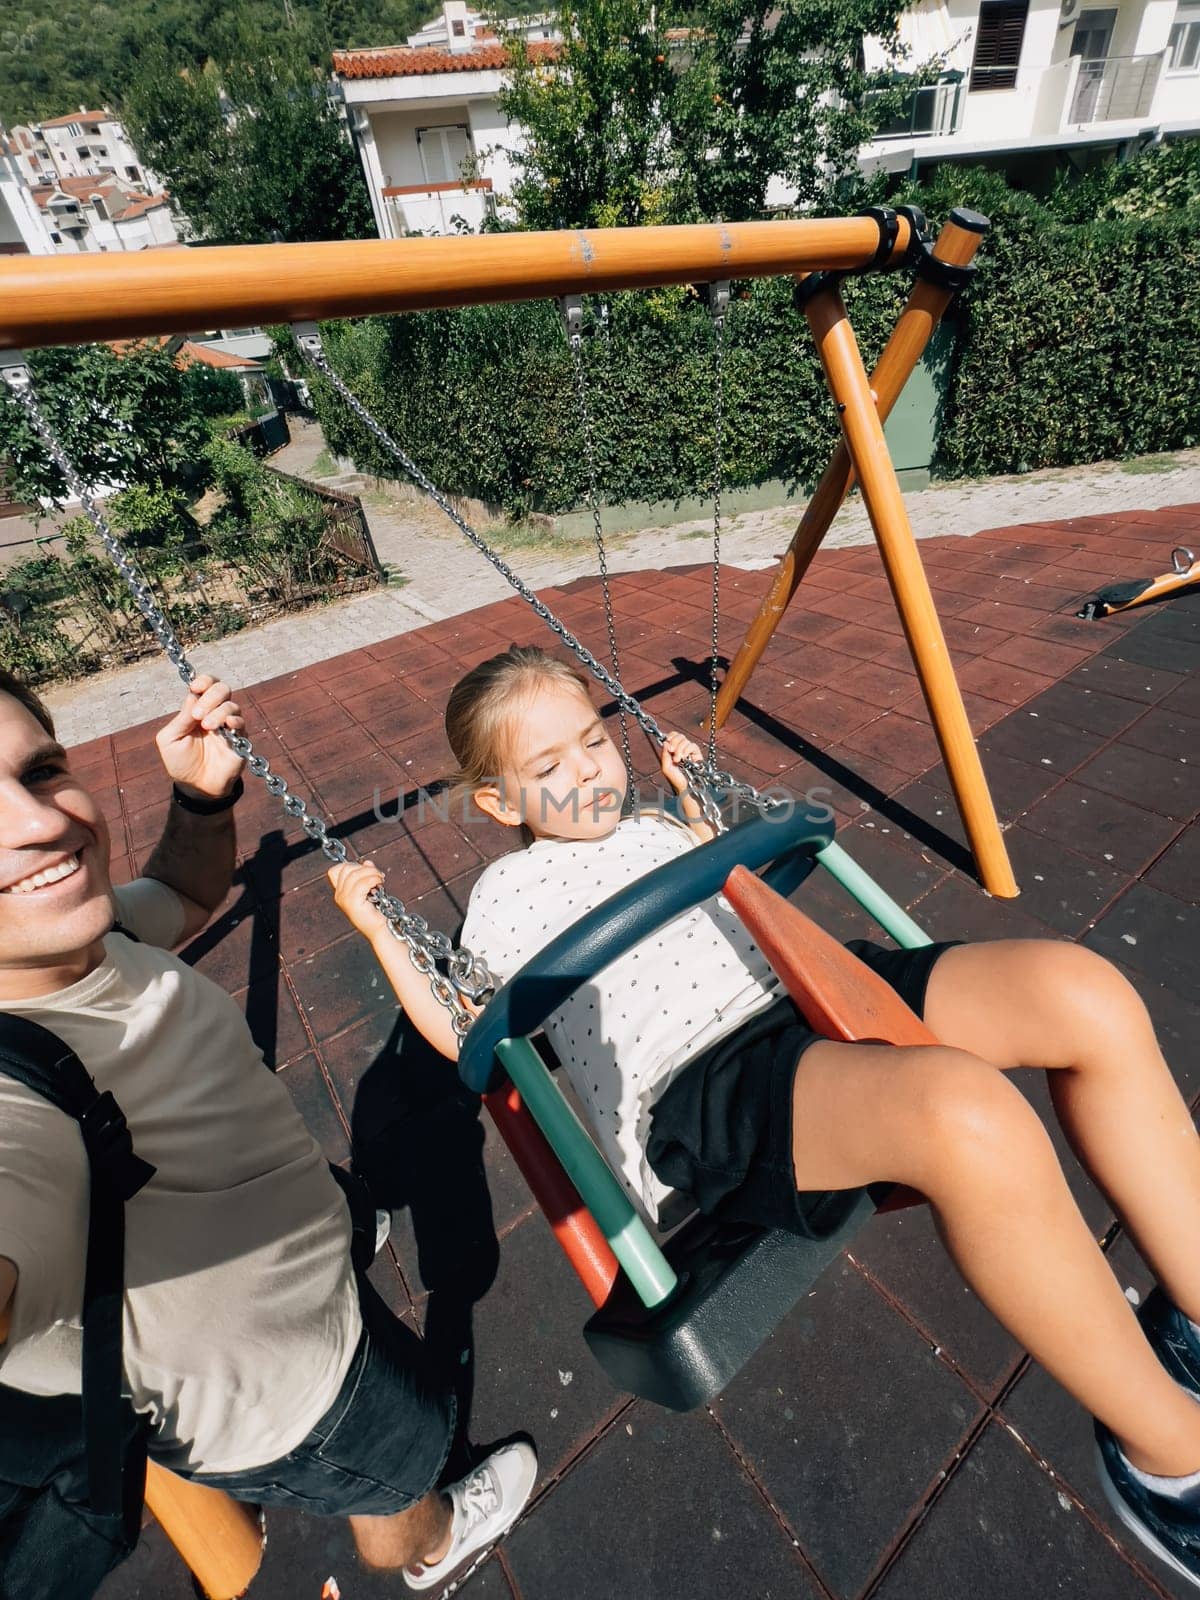 Dad swings a little girl on a chain swing at the playground by Nadtochiy